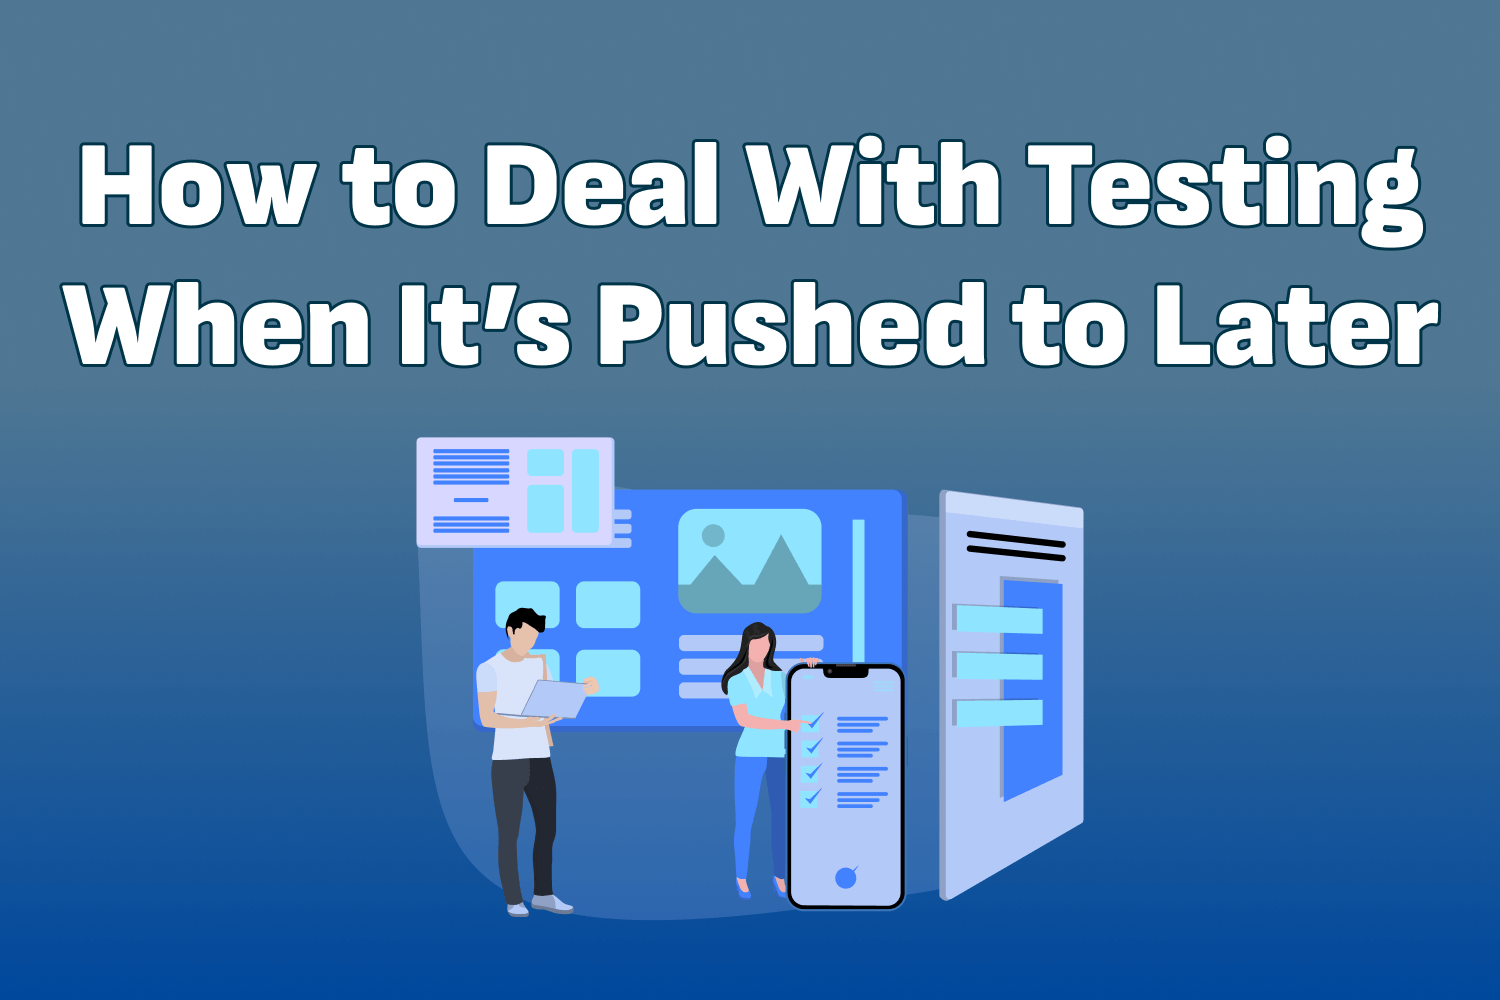 How to Deal With Testing When It’s Pushed to Later